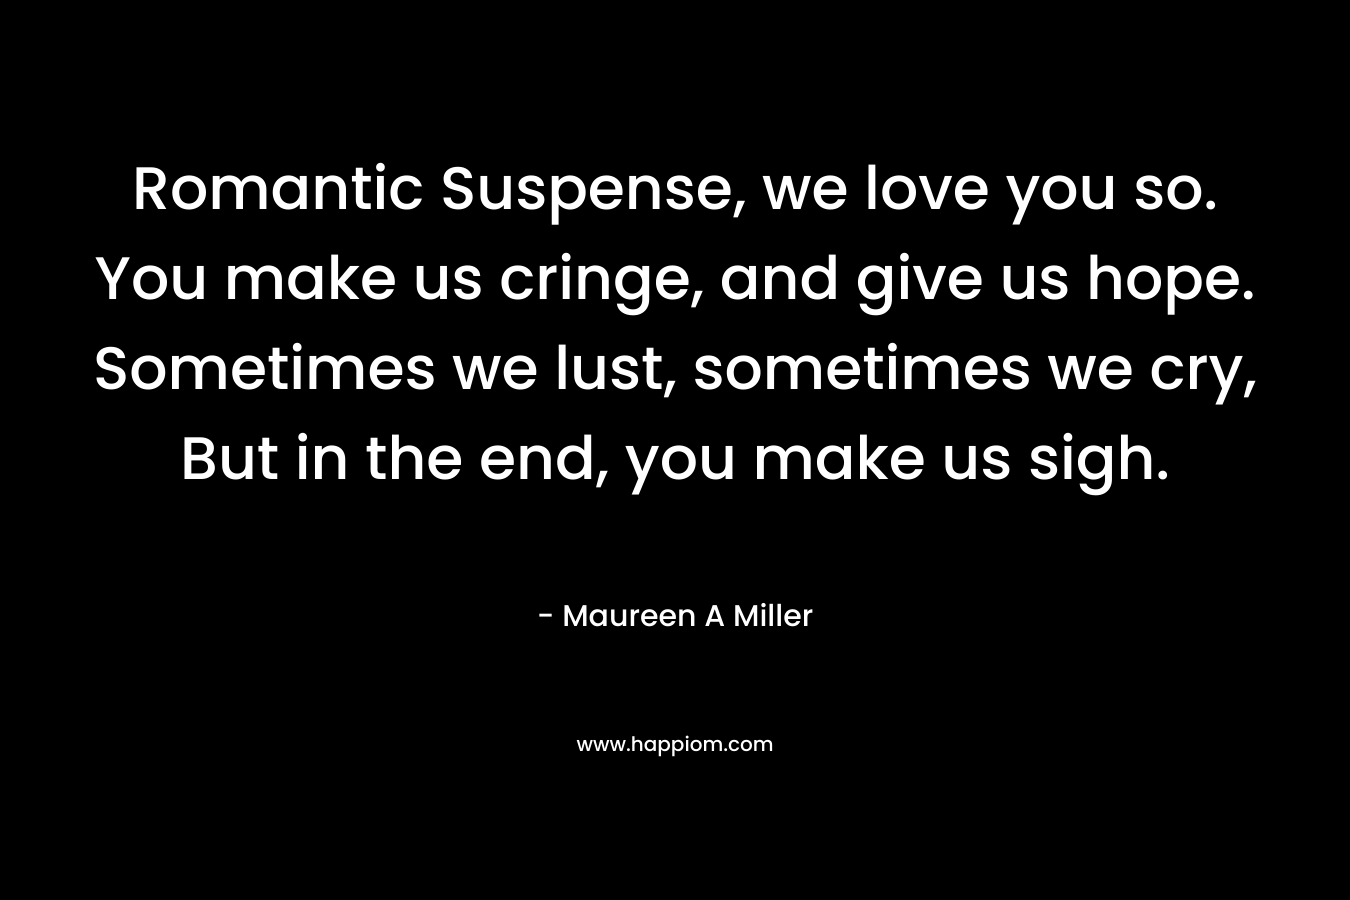 Romantic Suspense, we love you so. You make us cringe, and give us hope. Sometimes we lust, sometimes we cry, But in the end, you make us sigh. – Maureen A Miller